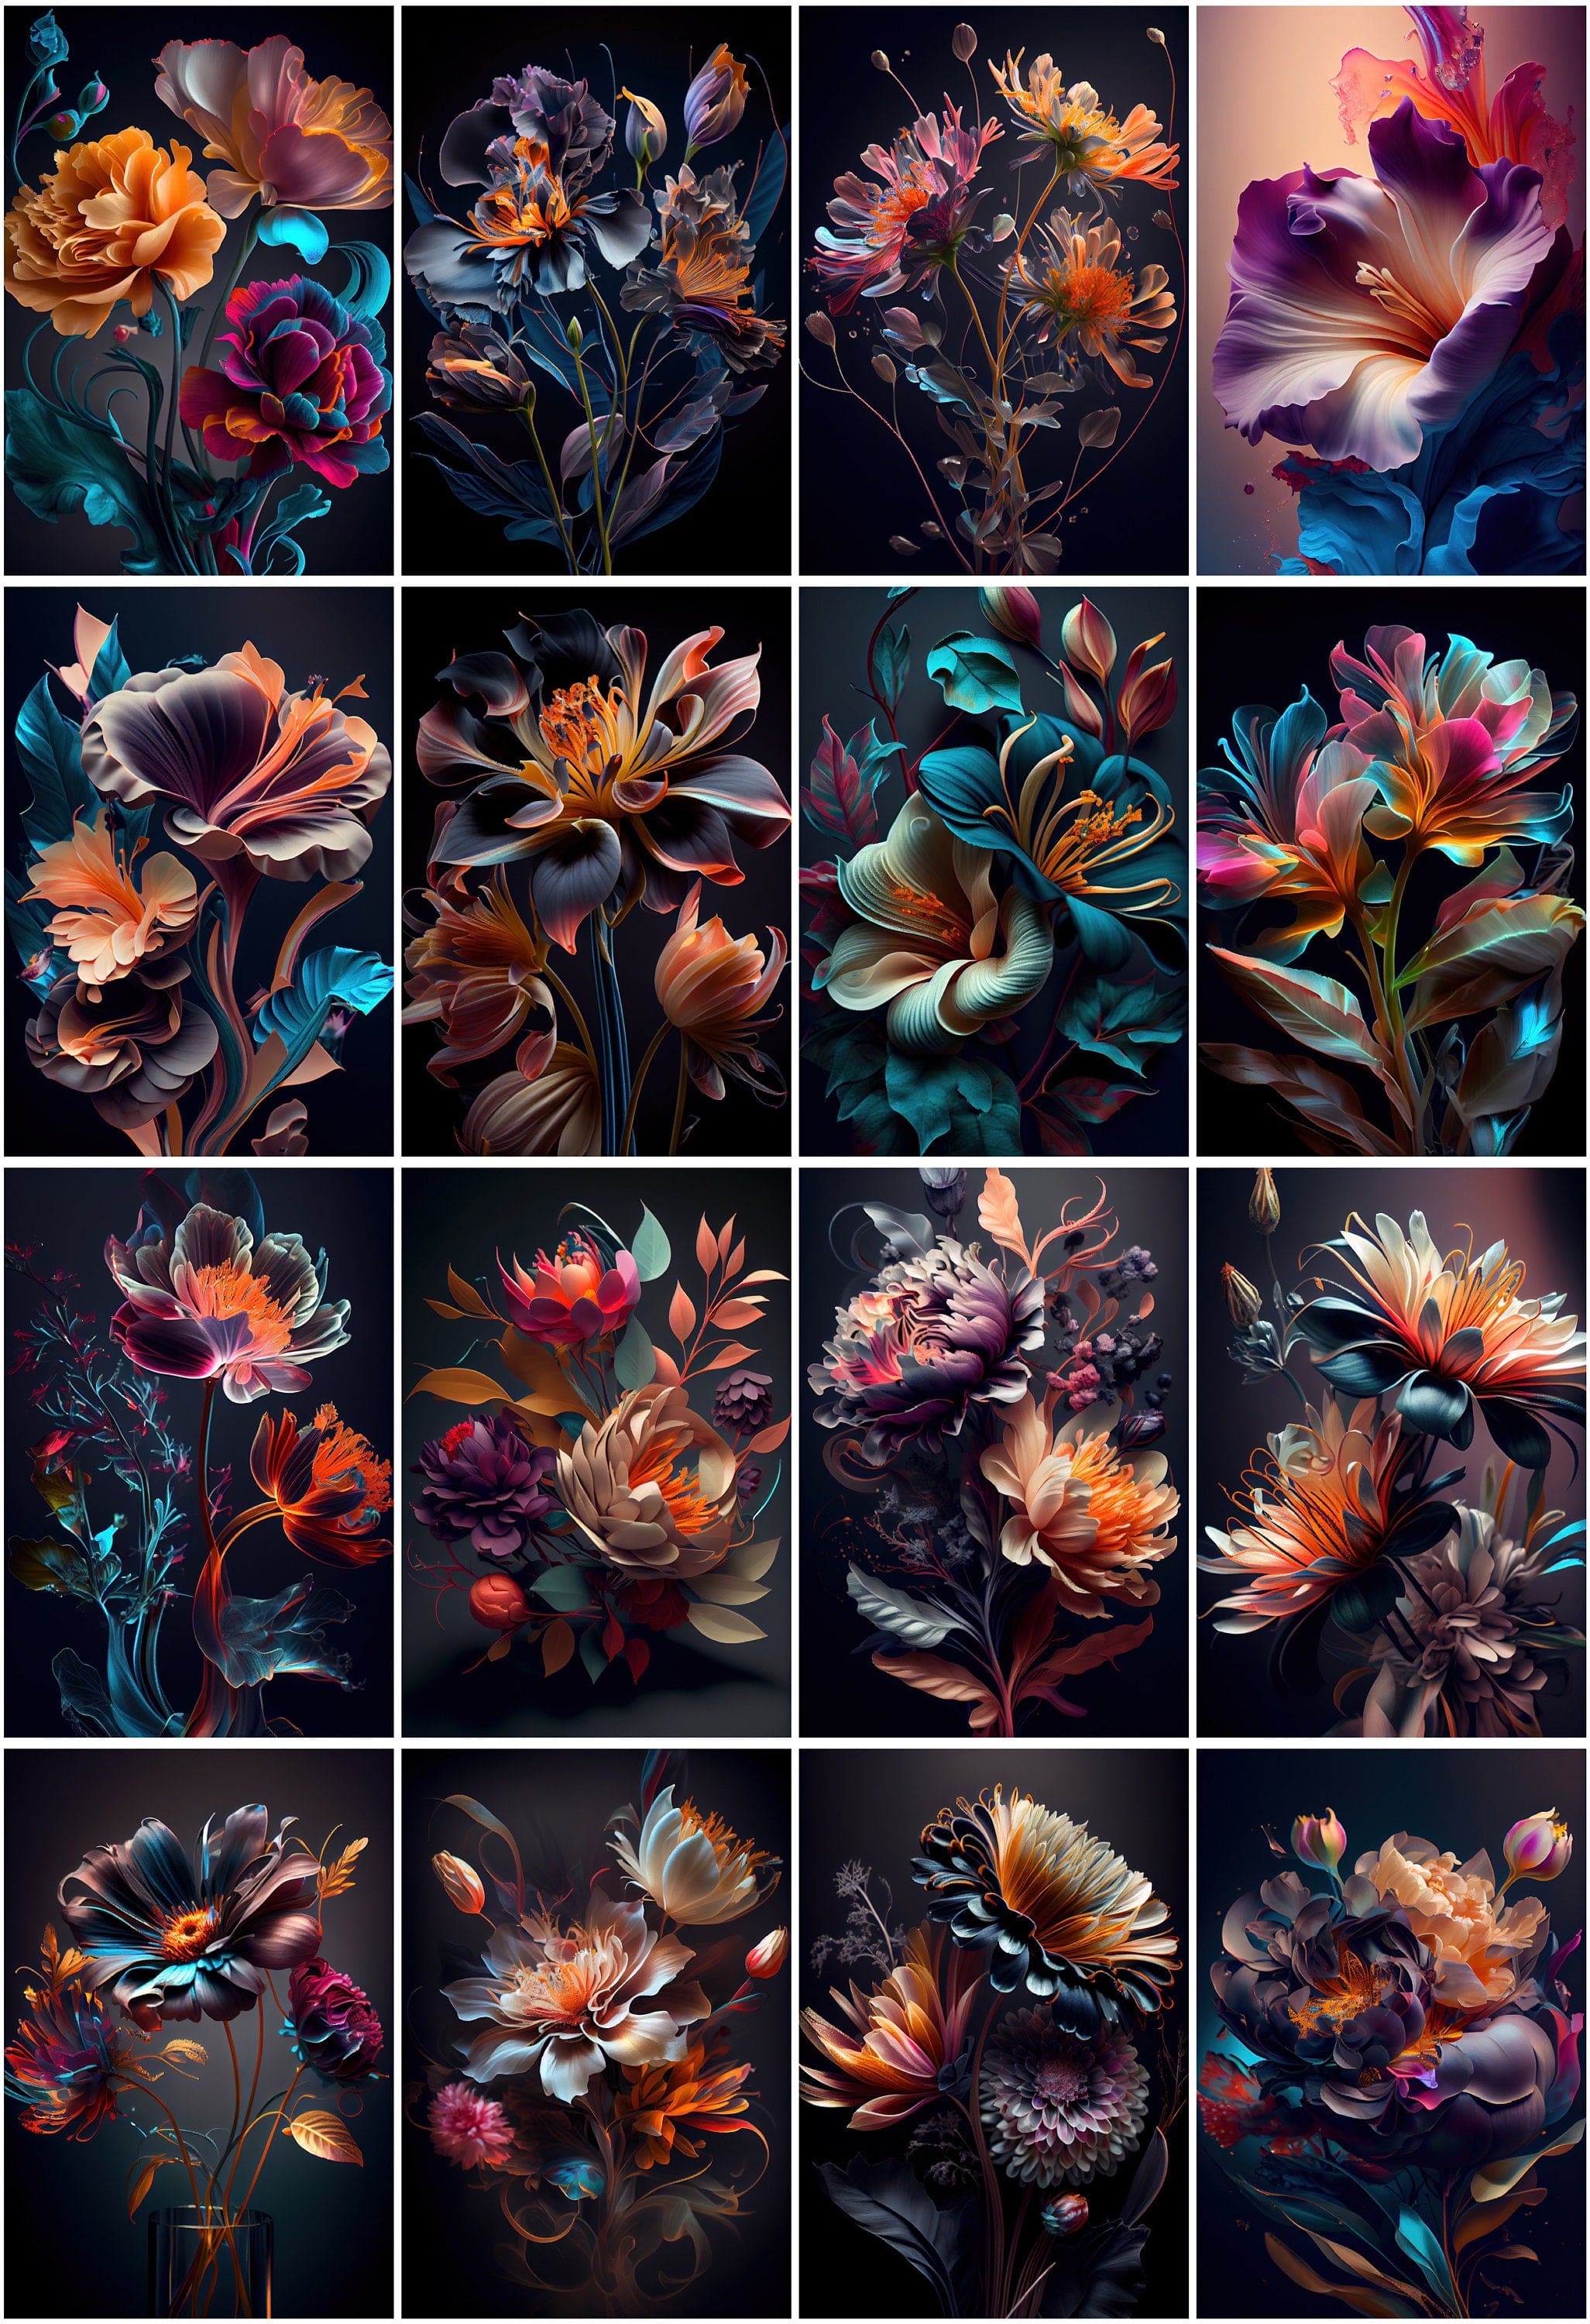 250 Image Bundle Featuring Gorgeous Floral Arrangements - Elevate Your Wall Art and Add a Technical Touch to Your Creative Projects Digital Download Sumobundle